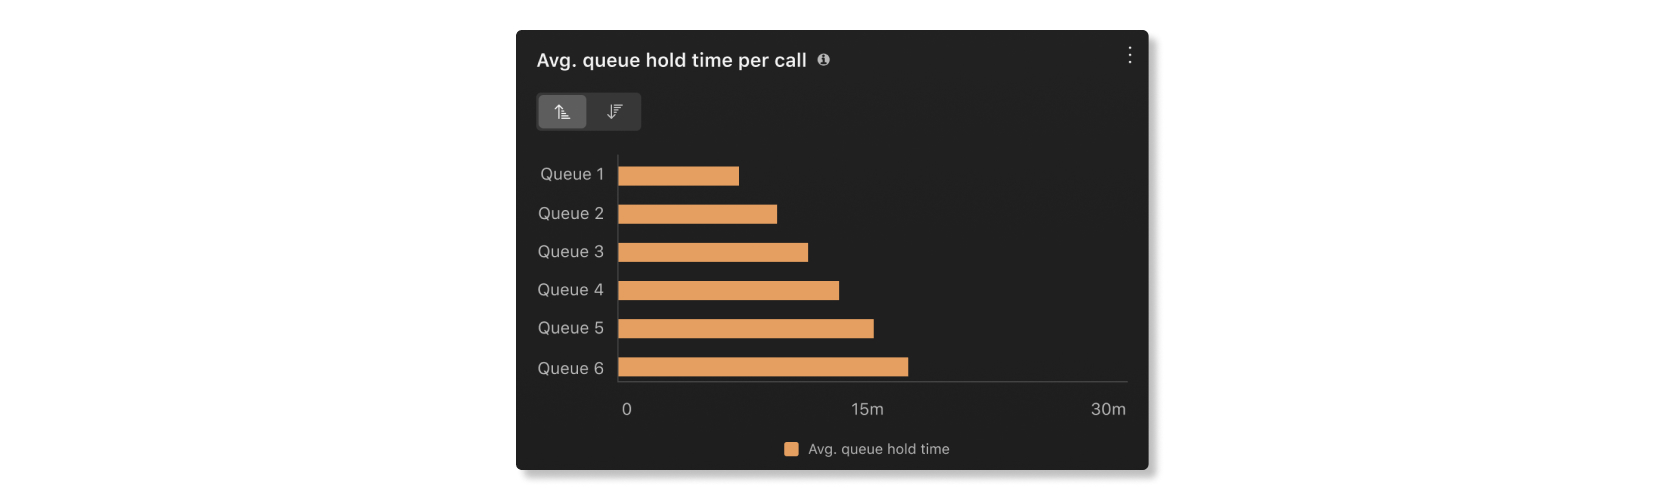 Avg. queue hold time per call chart in Supervisor desktop section of Customer Essentials analytics